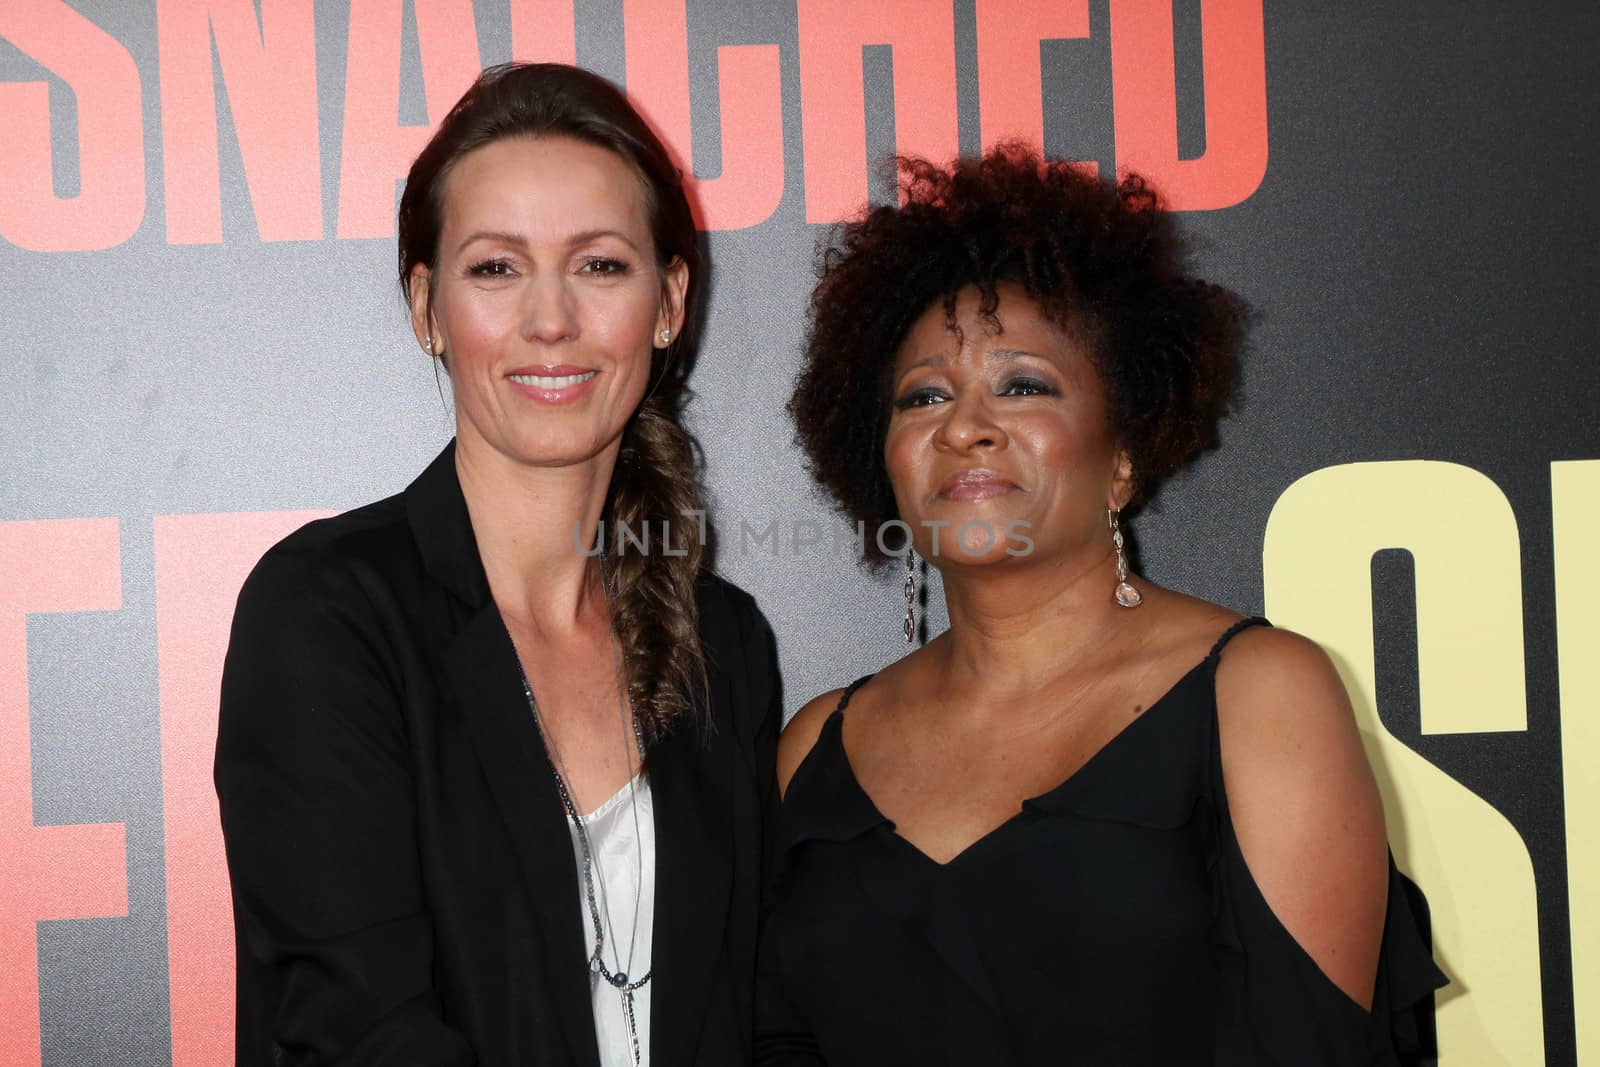 Wanda Sykes, Alex Sykes at the "Snatched" World Premiere, Village Theater, Westwood, CA 05-10-17